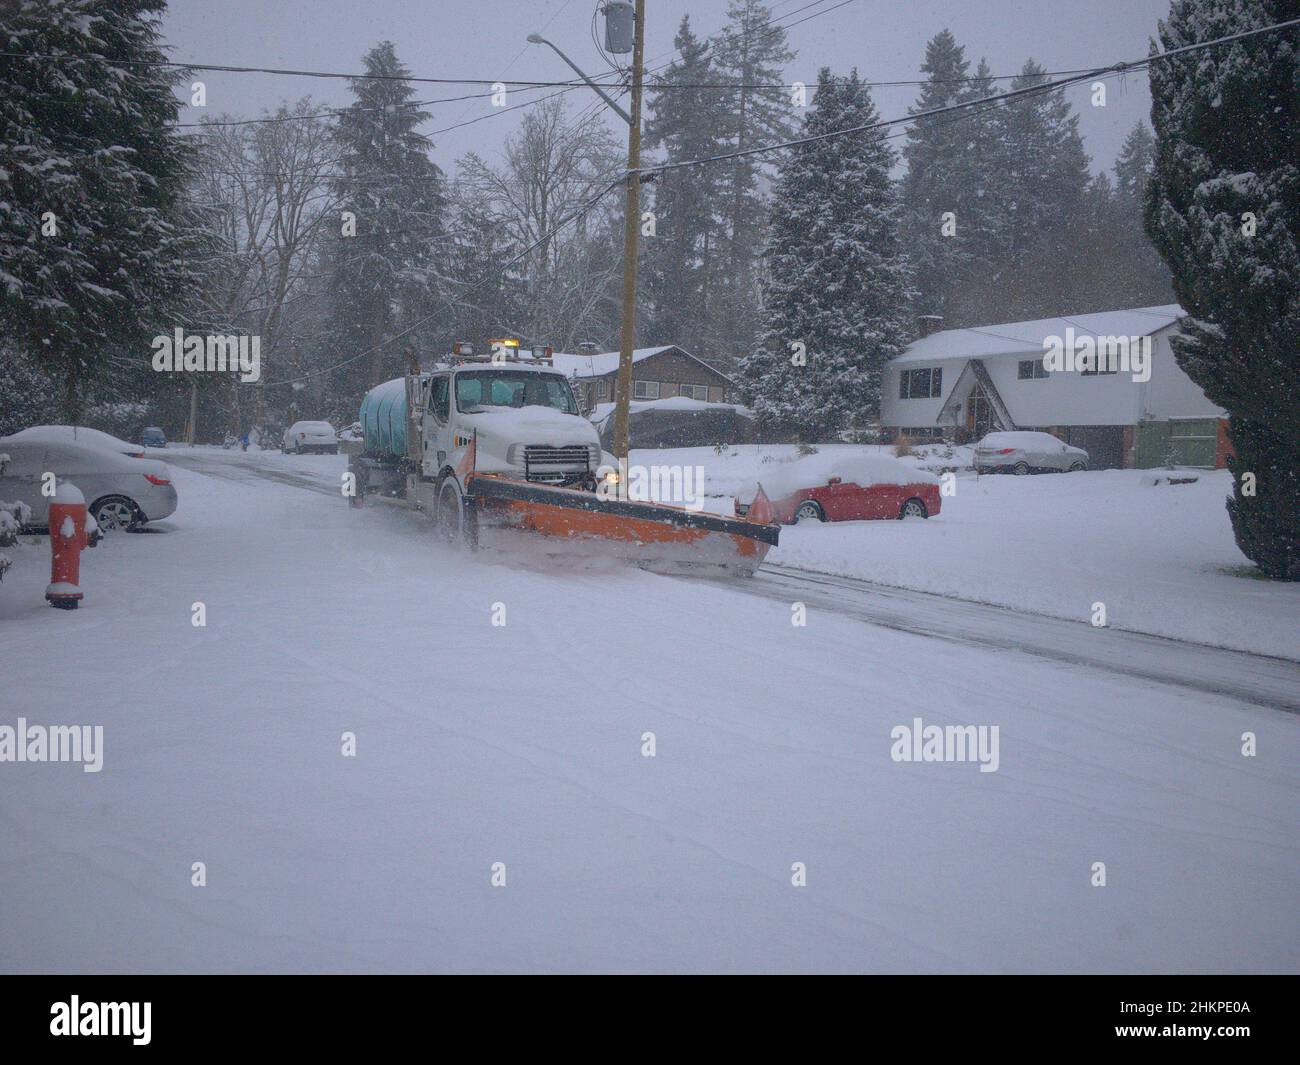 A municipal snow plow clears a snowy street after a heavy snowfall in British Columbia, Canada. Stock Photo